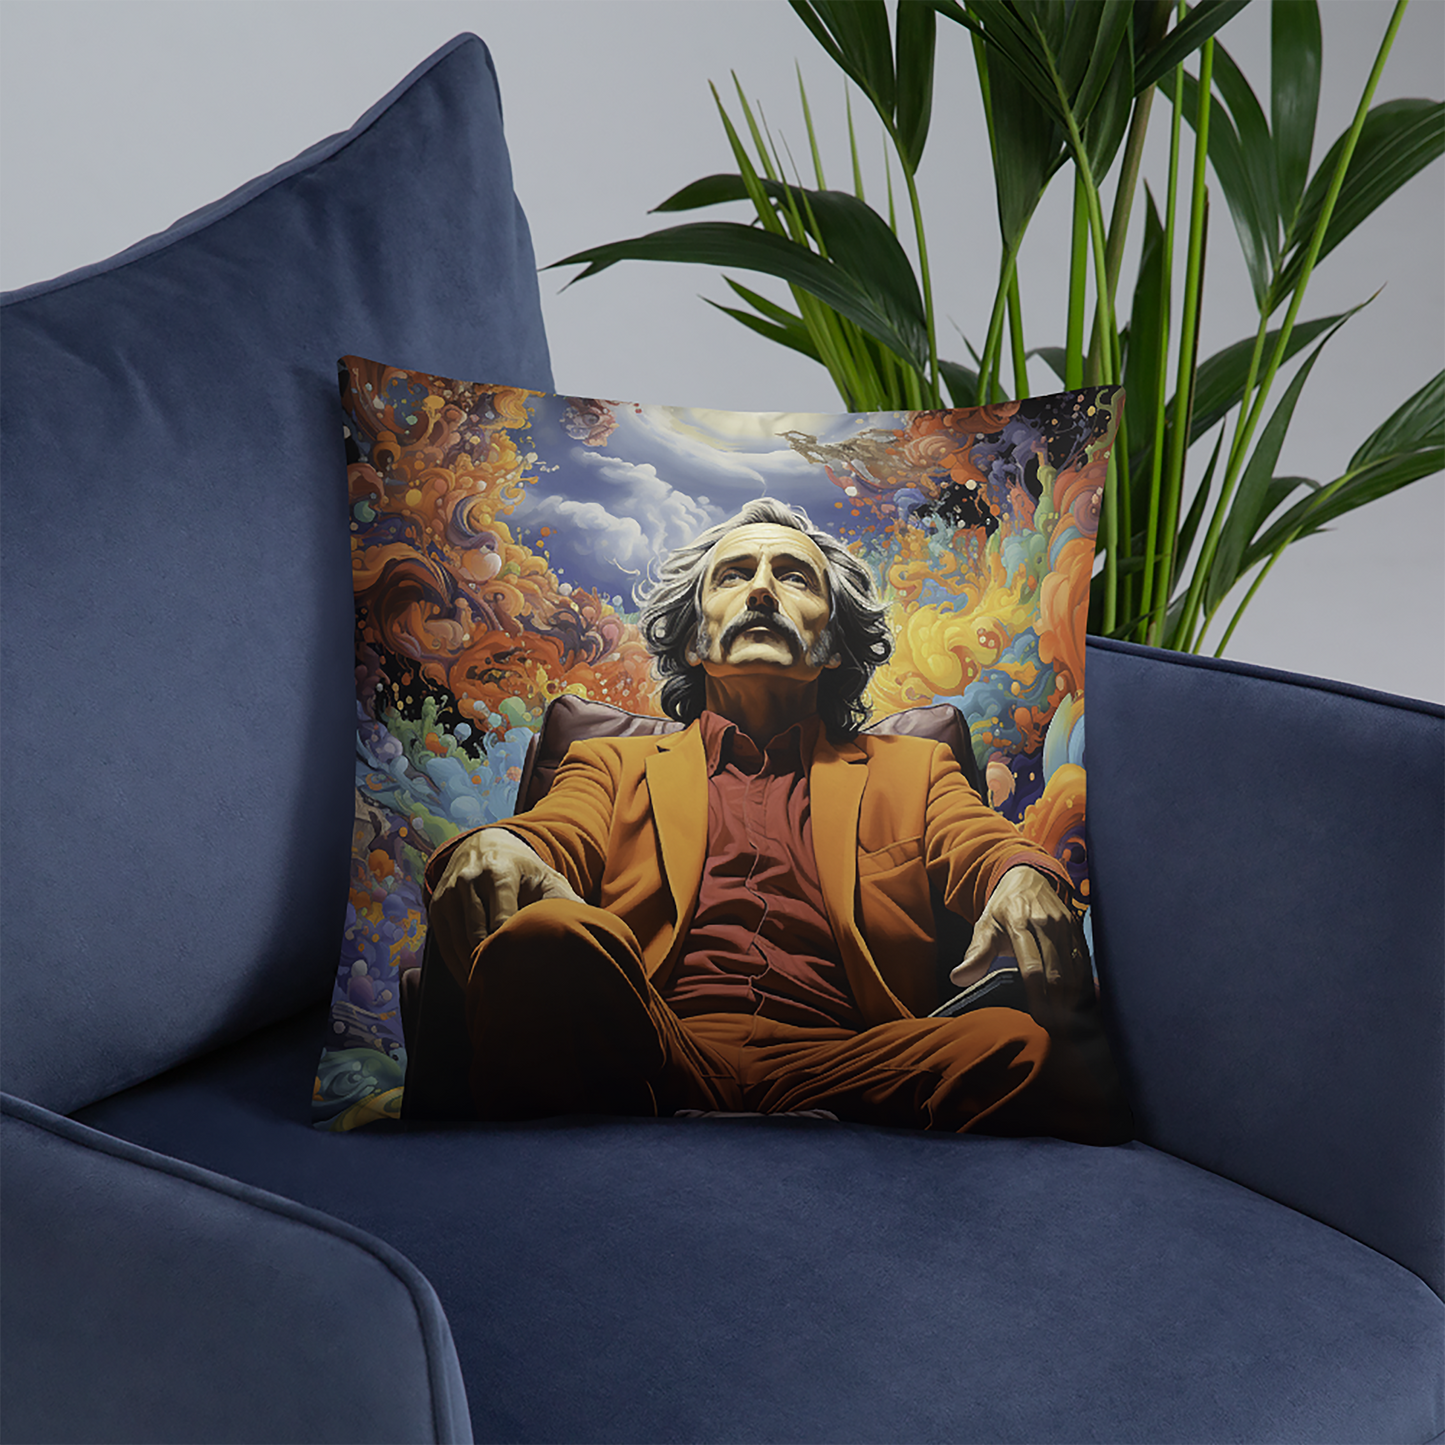 Psychedelic Throw Pillow Visionary Orange Suited Elder Polyester Decorative Cushion 18x18